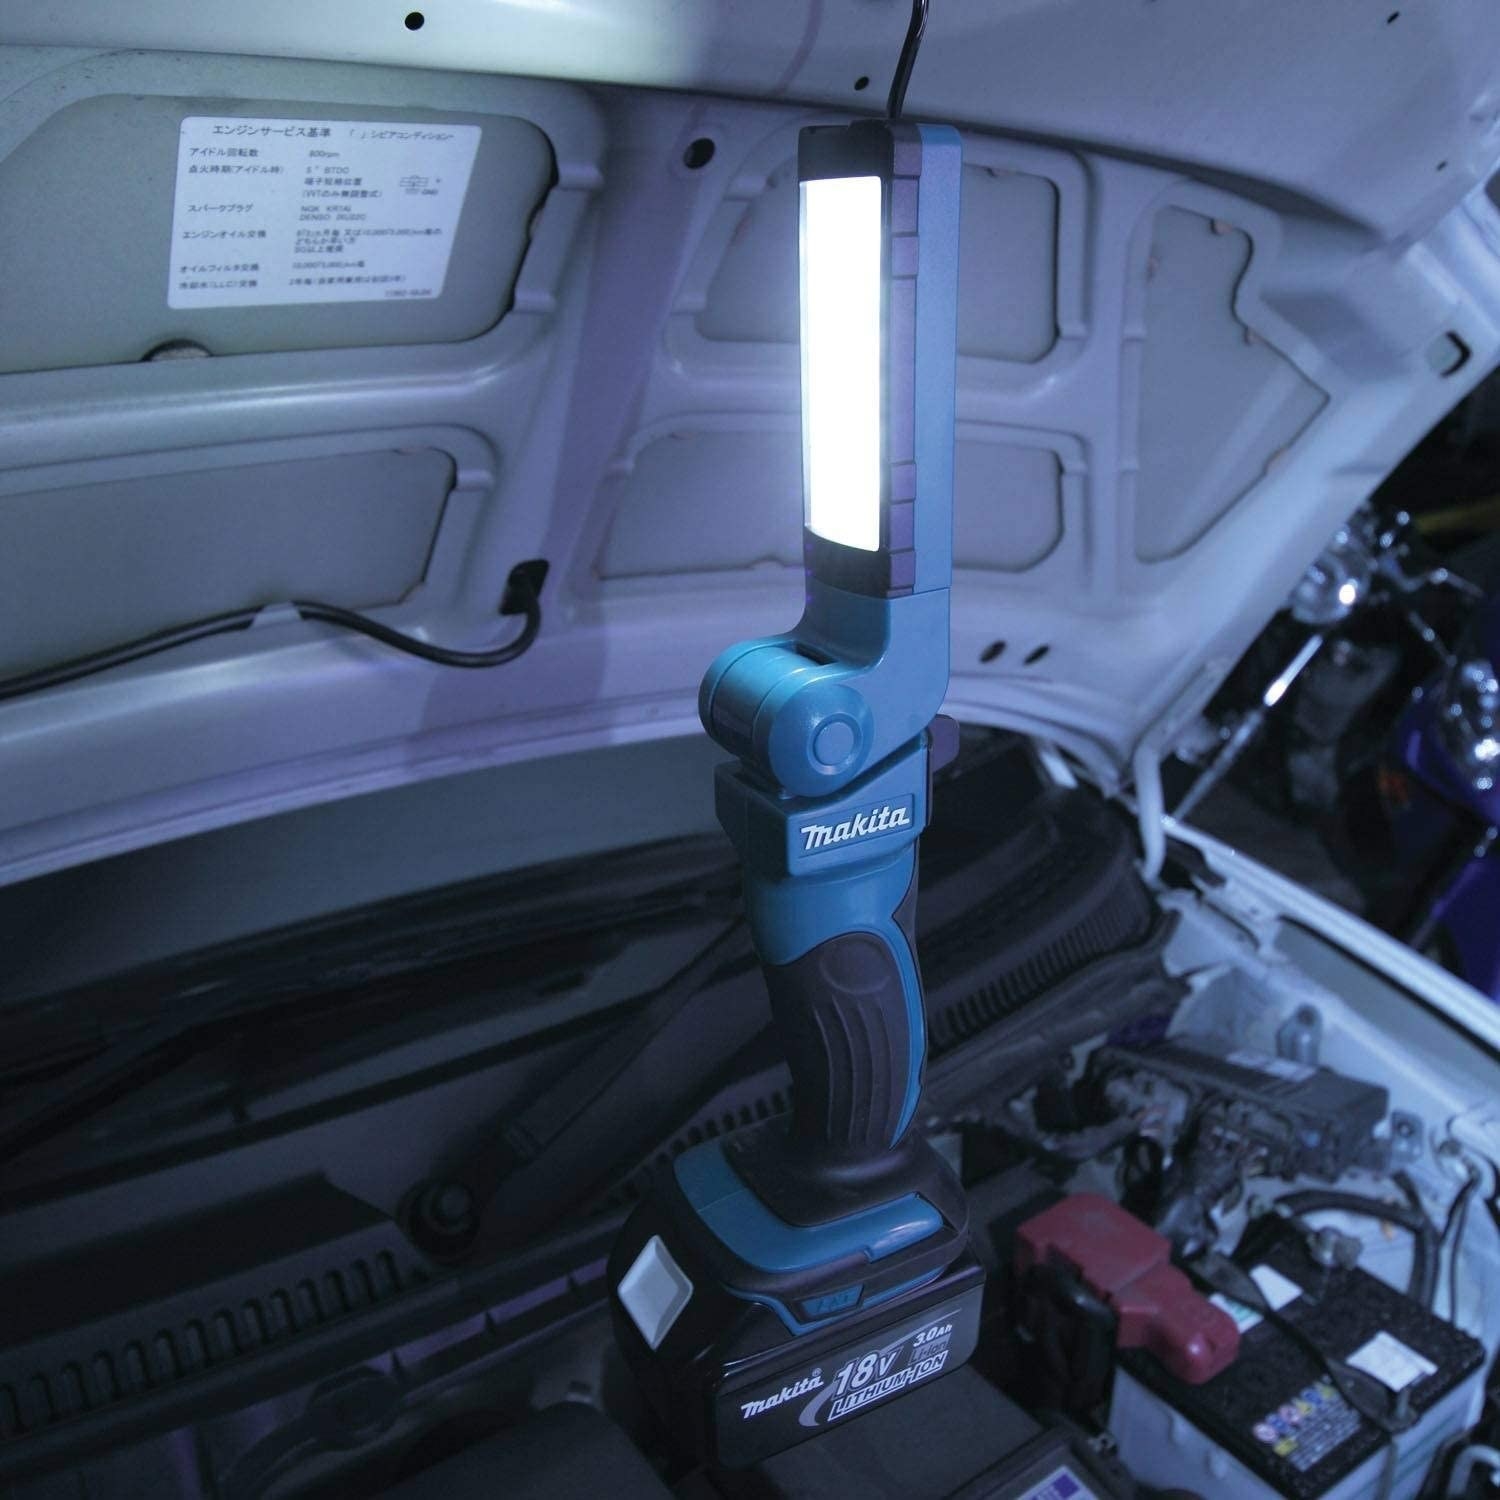 The flashlight in the hood of a car